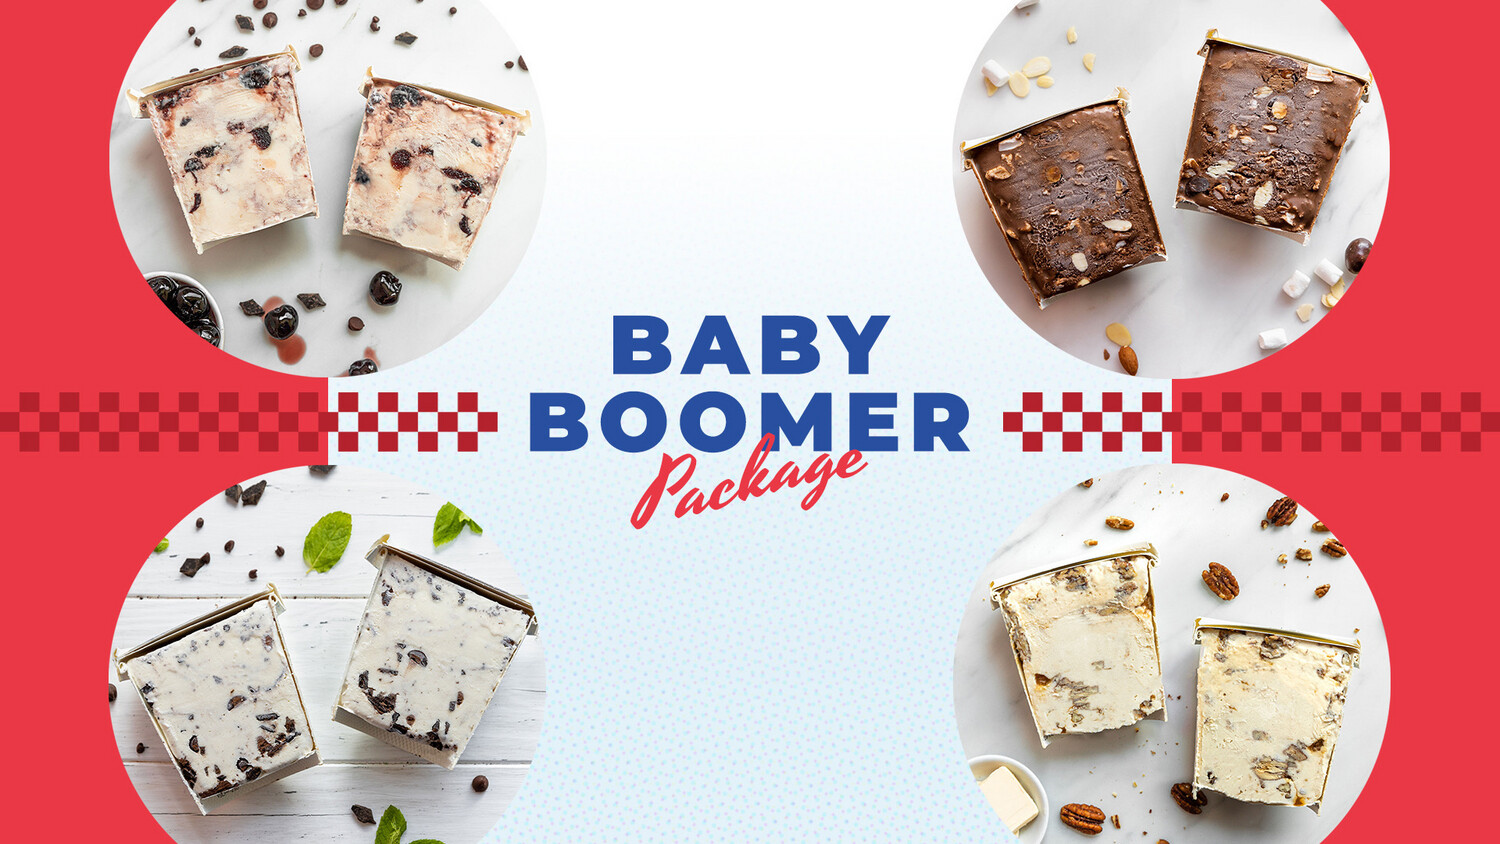 NATIONWIDE the BABY BOOMER 